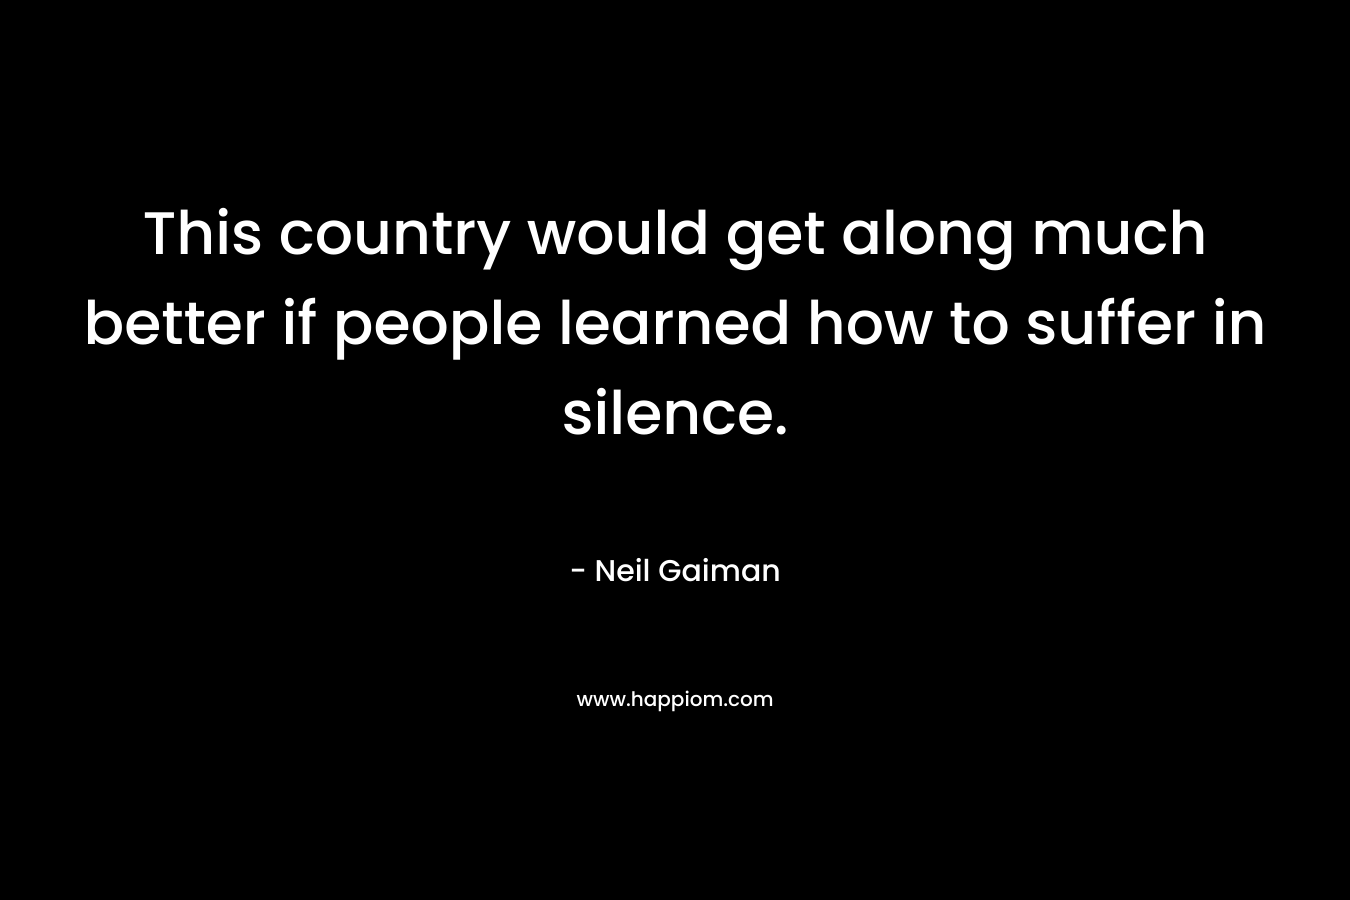 This country would get along much better if people learned how to suffer in silence. – Neil Gaiman